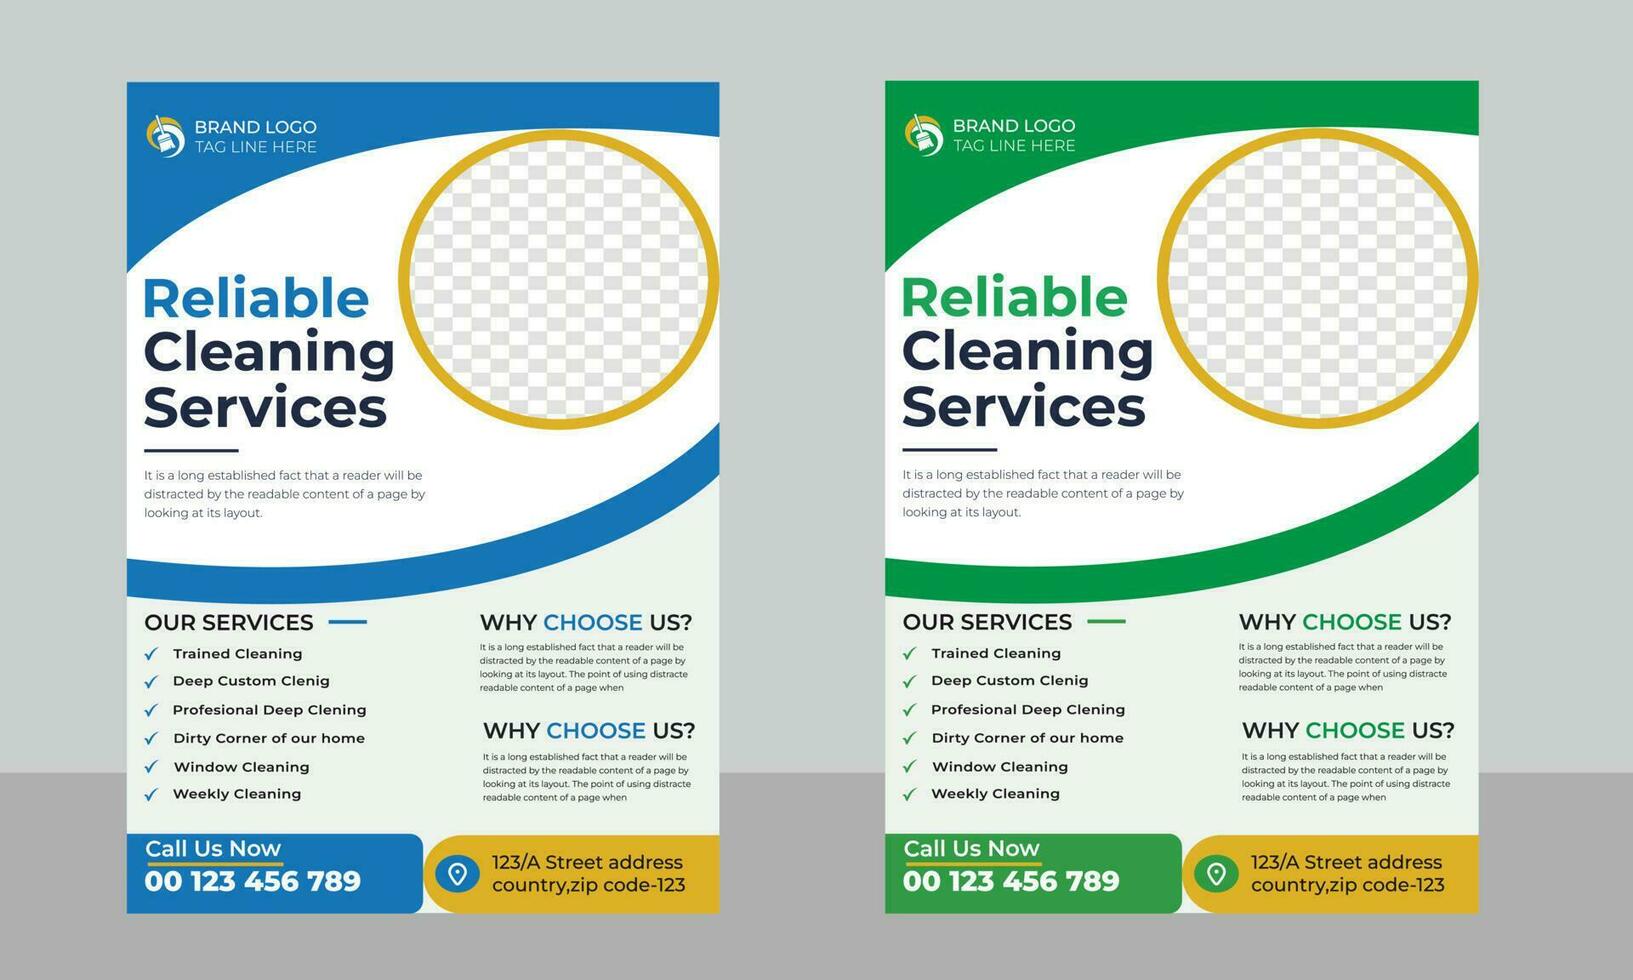 A4 Size House cleaning services flyer and Business Flyer Design Template vector